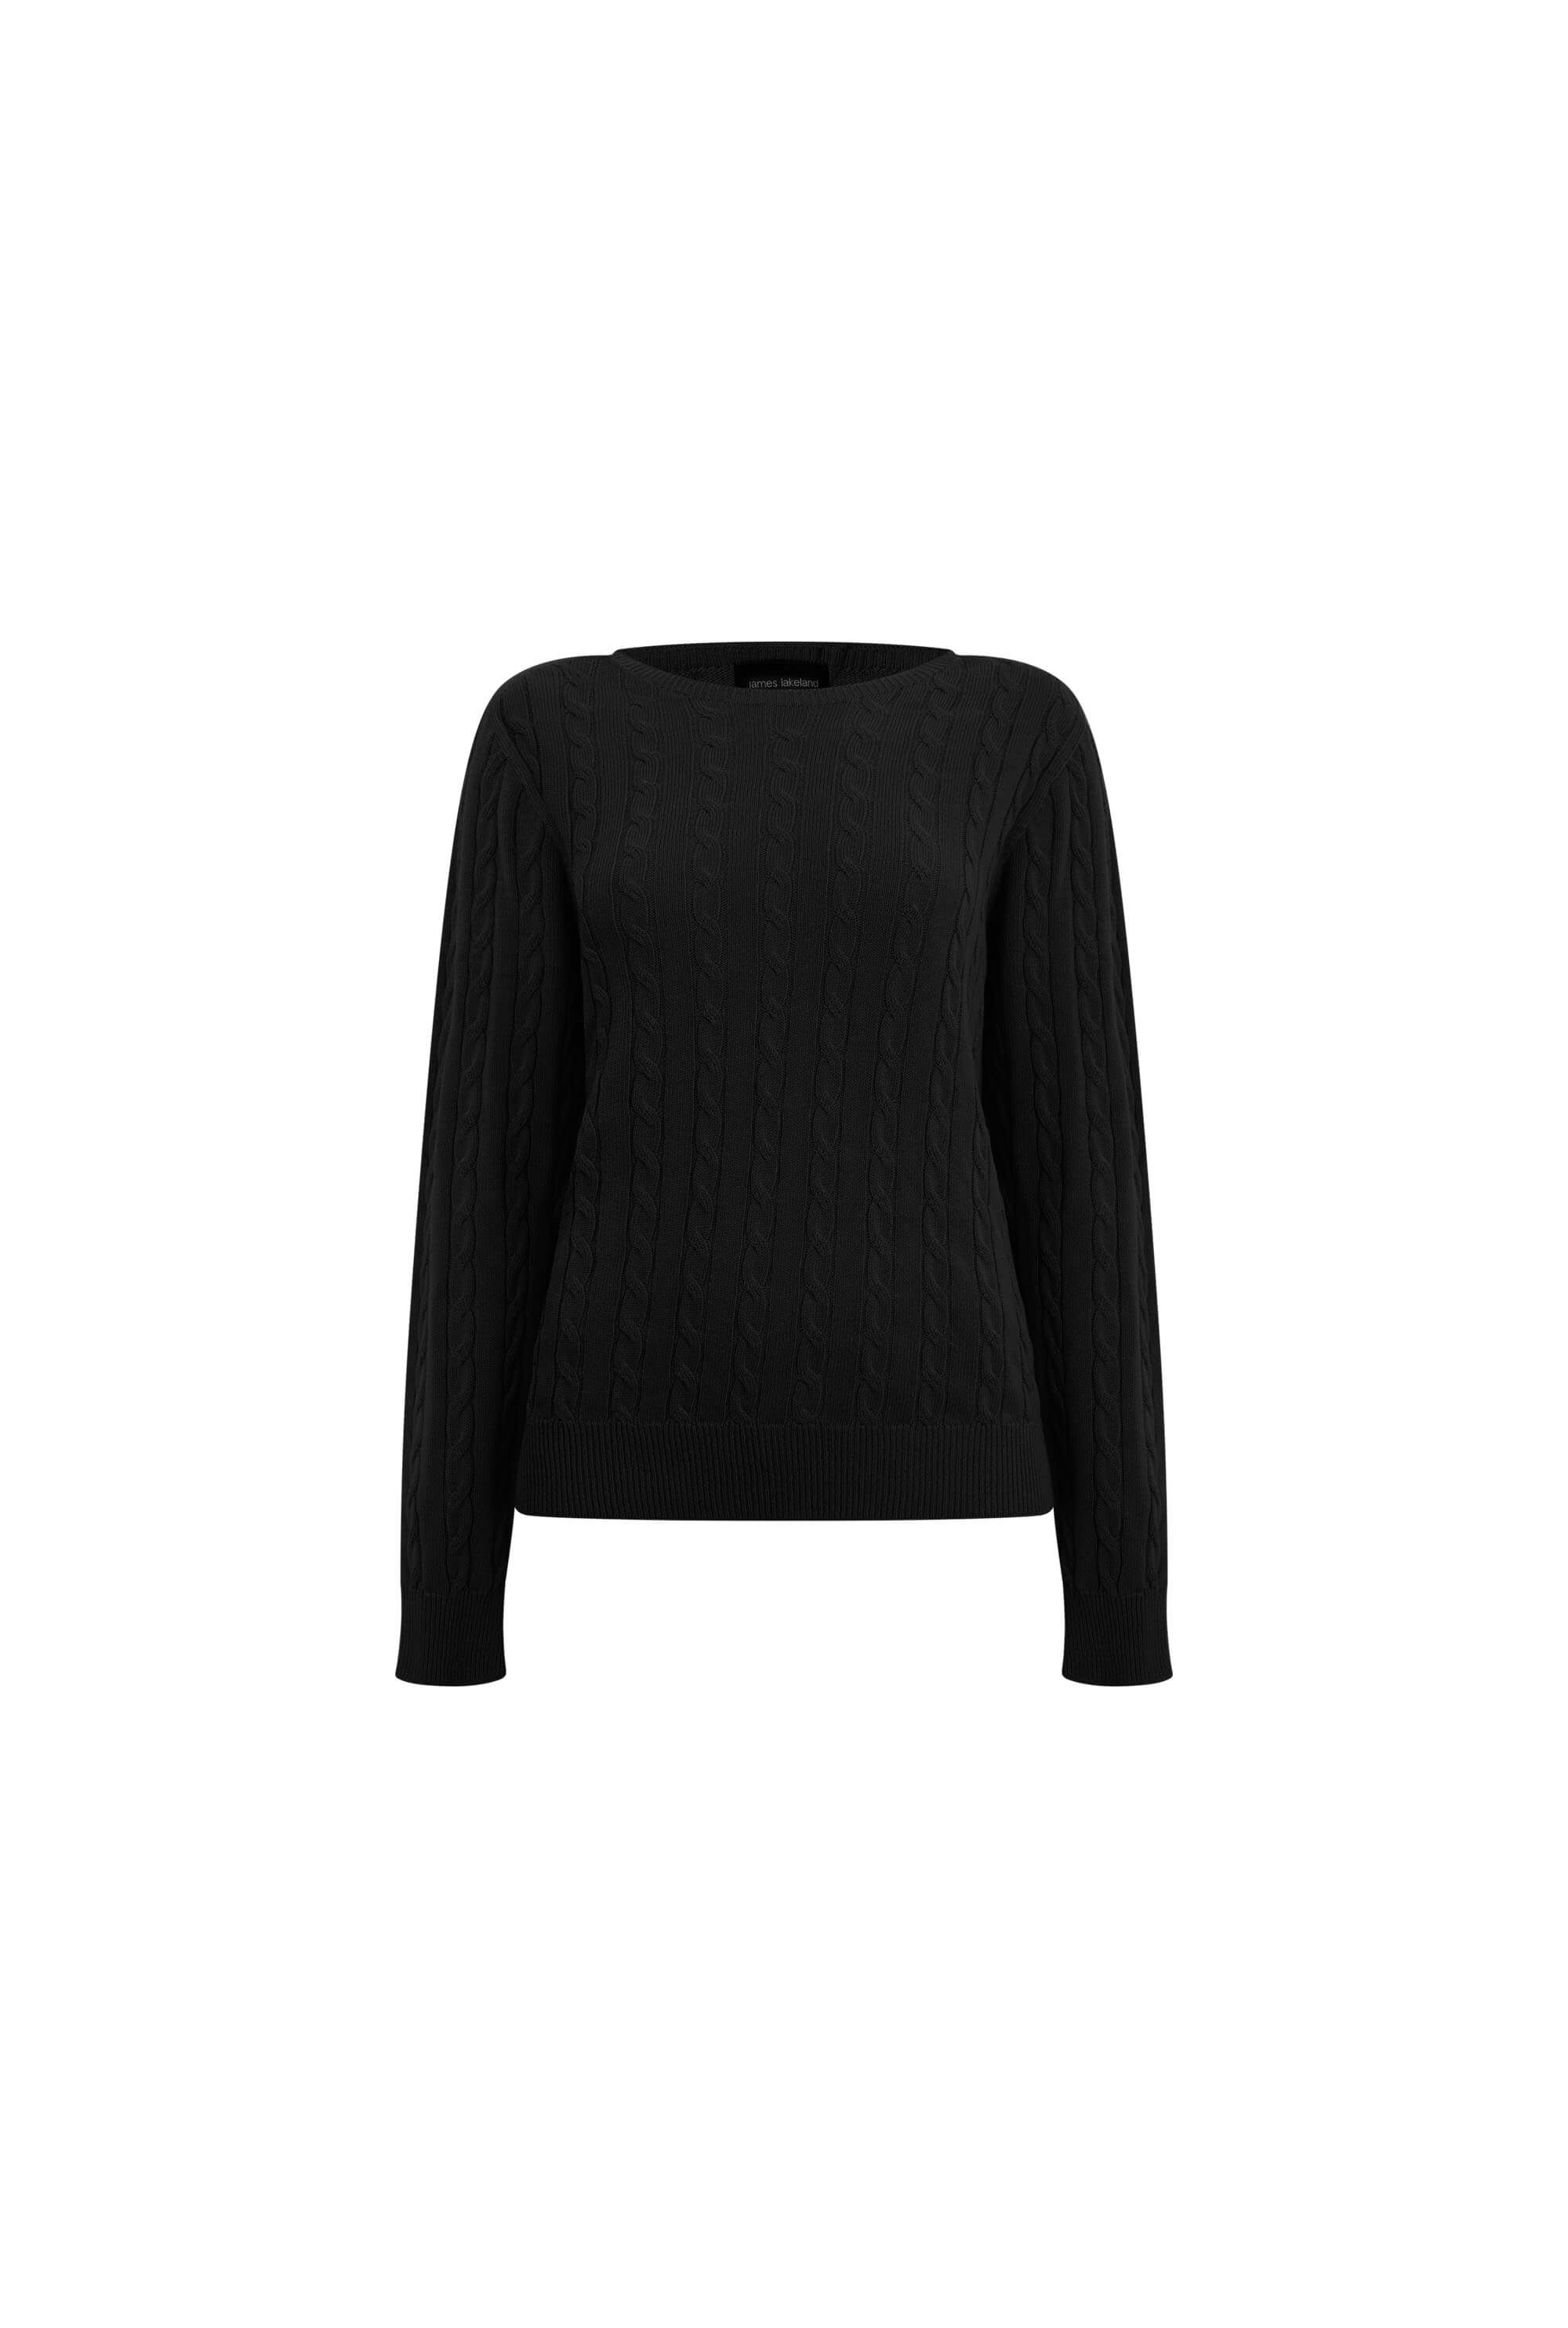 Women’s Cable Knit Jumper Black Extra Small James Lakeland